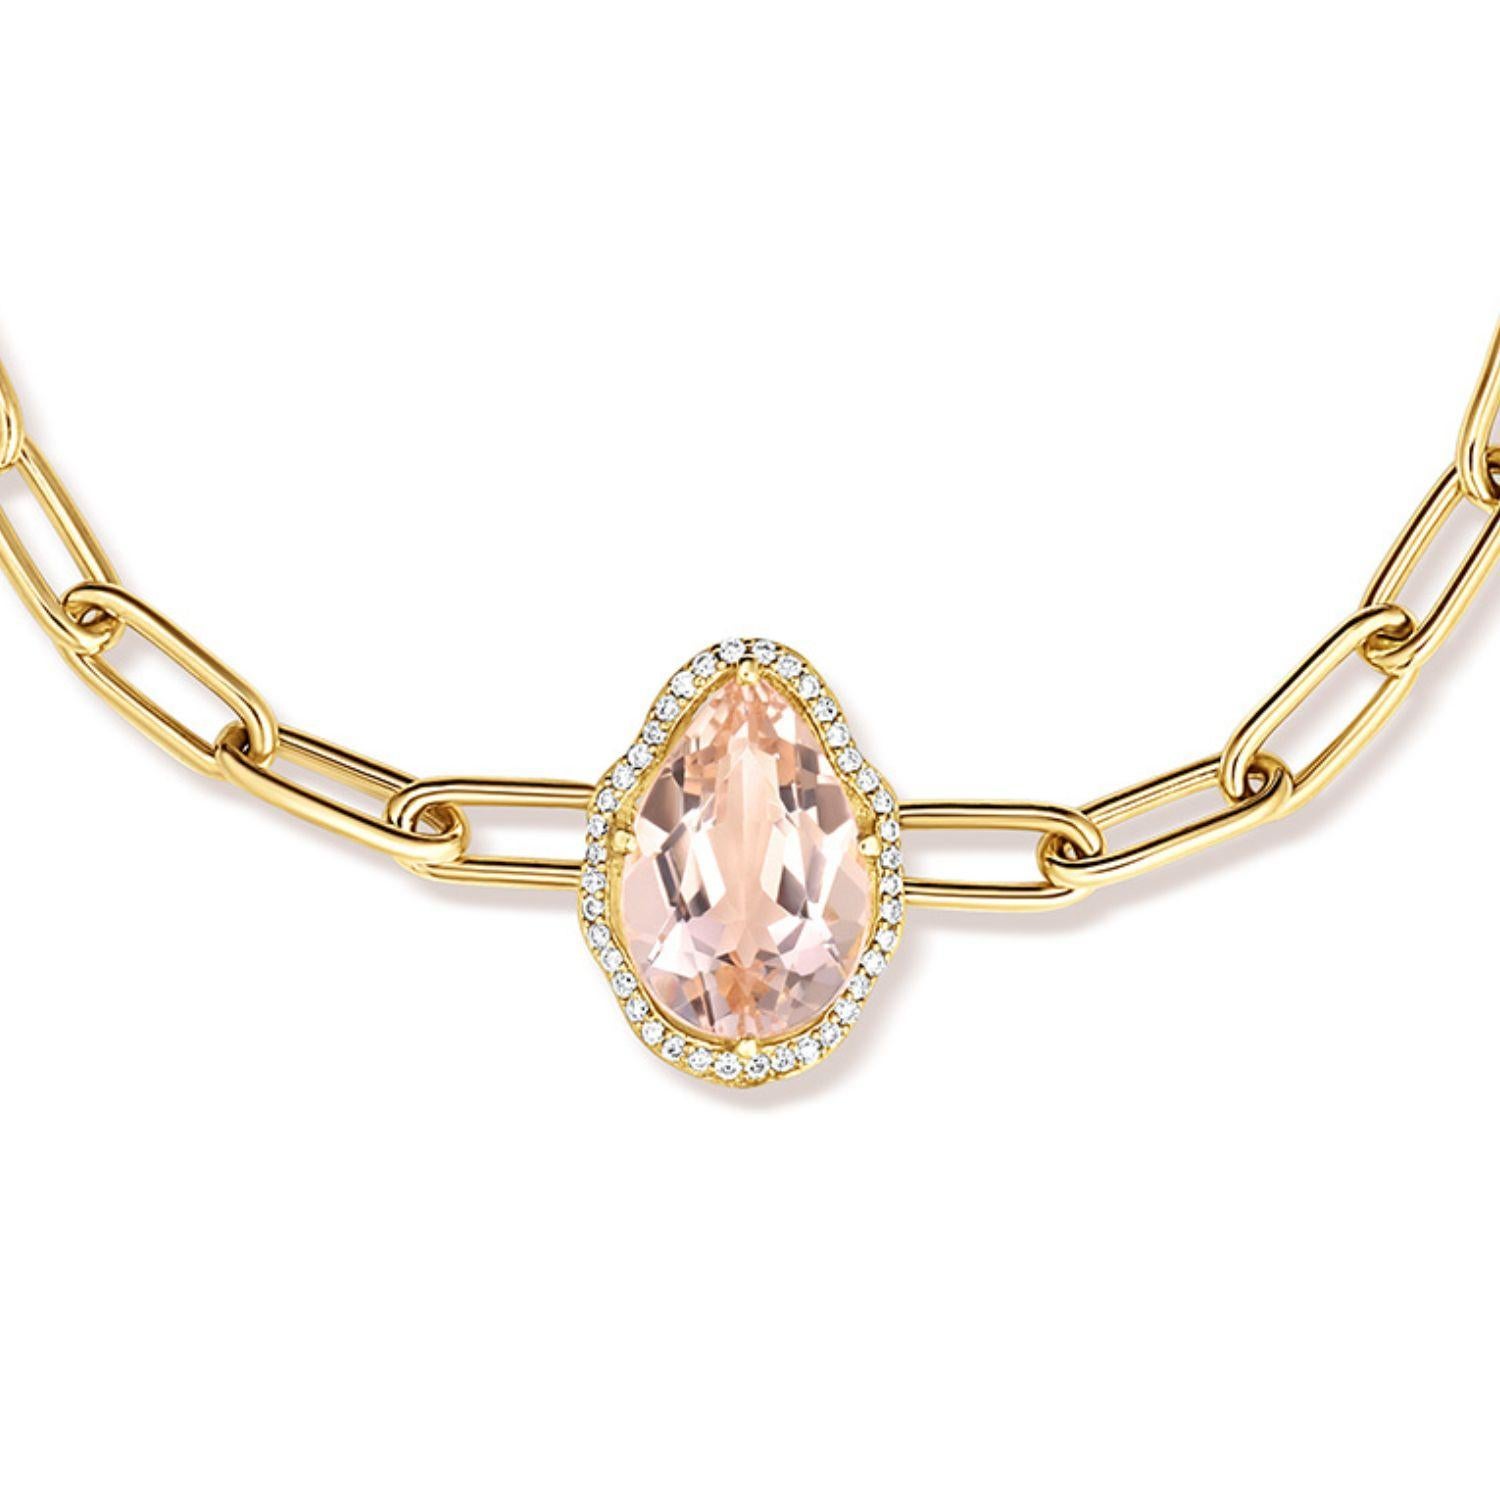 Glow Bracelet. 18K yellow gold (750/1000), with a 2.78 carat pear-cut peach morganite and 0.1 carats of round brilliant-cut diamonds. 18K yellow gold chain with adjustable length of 17 cm.